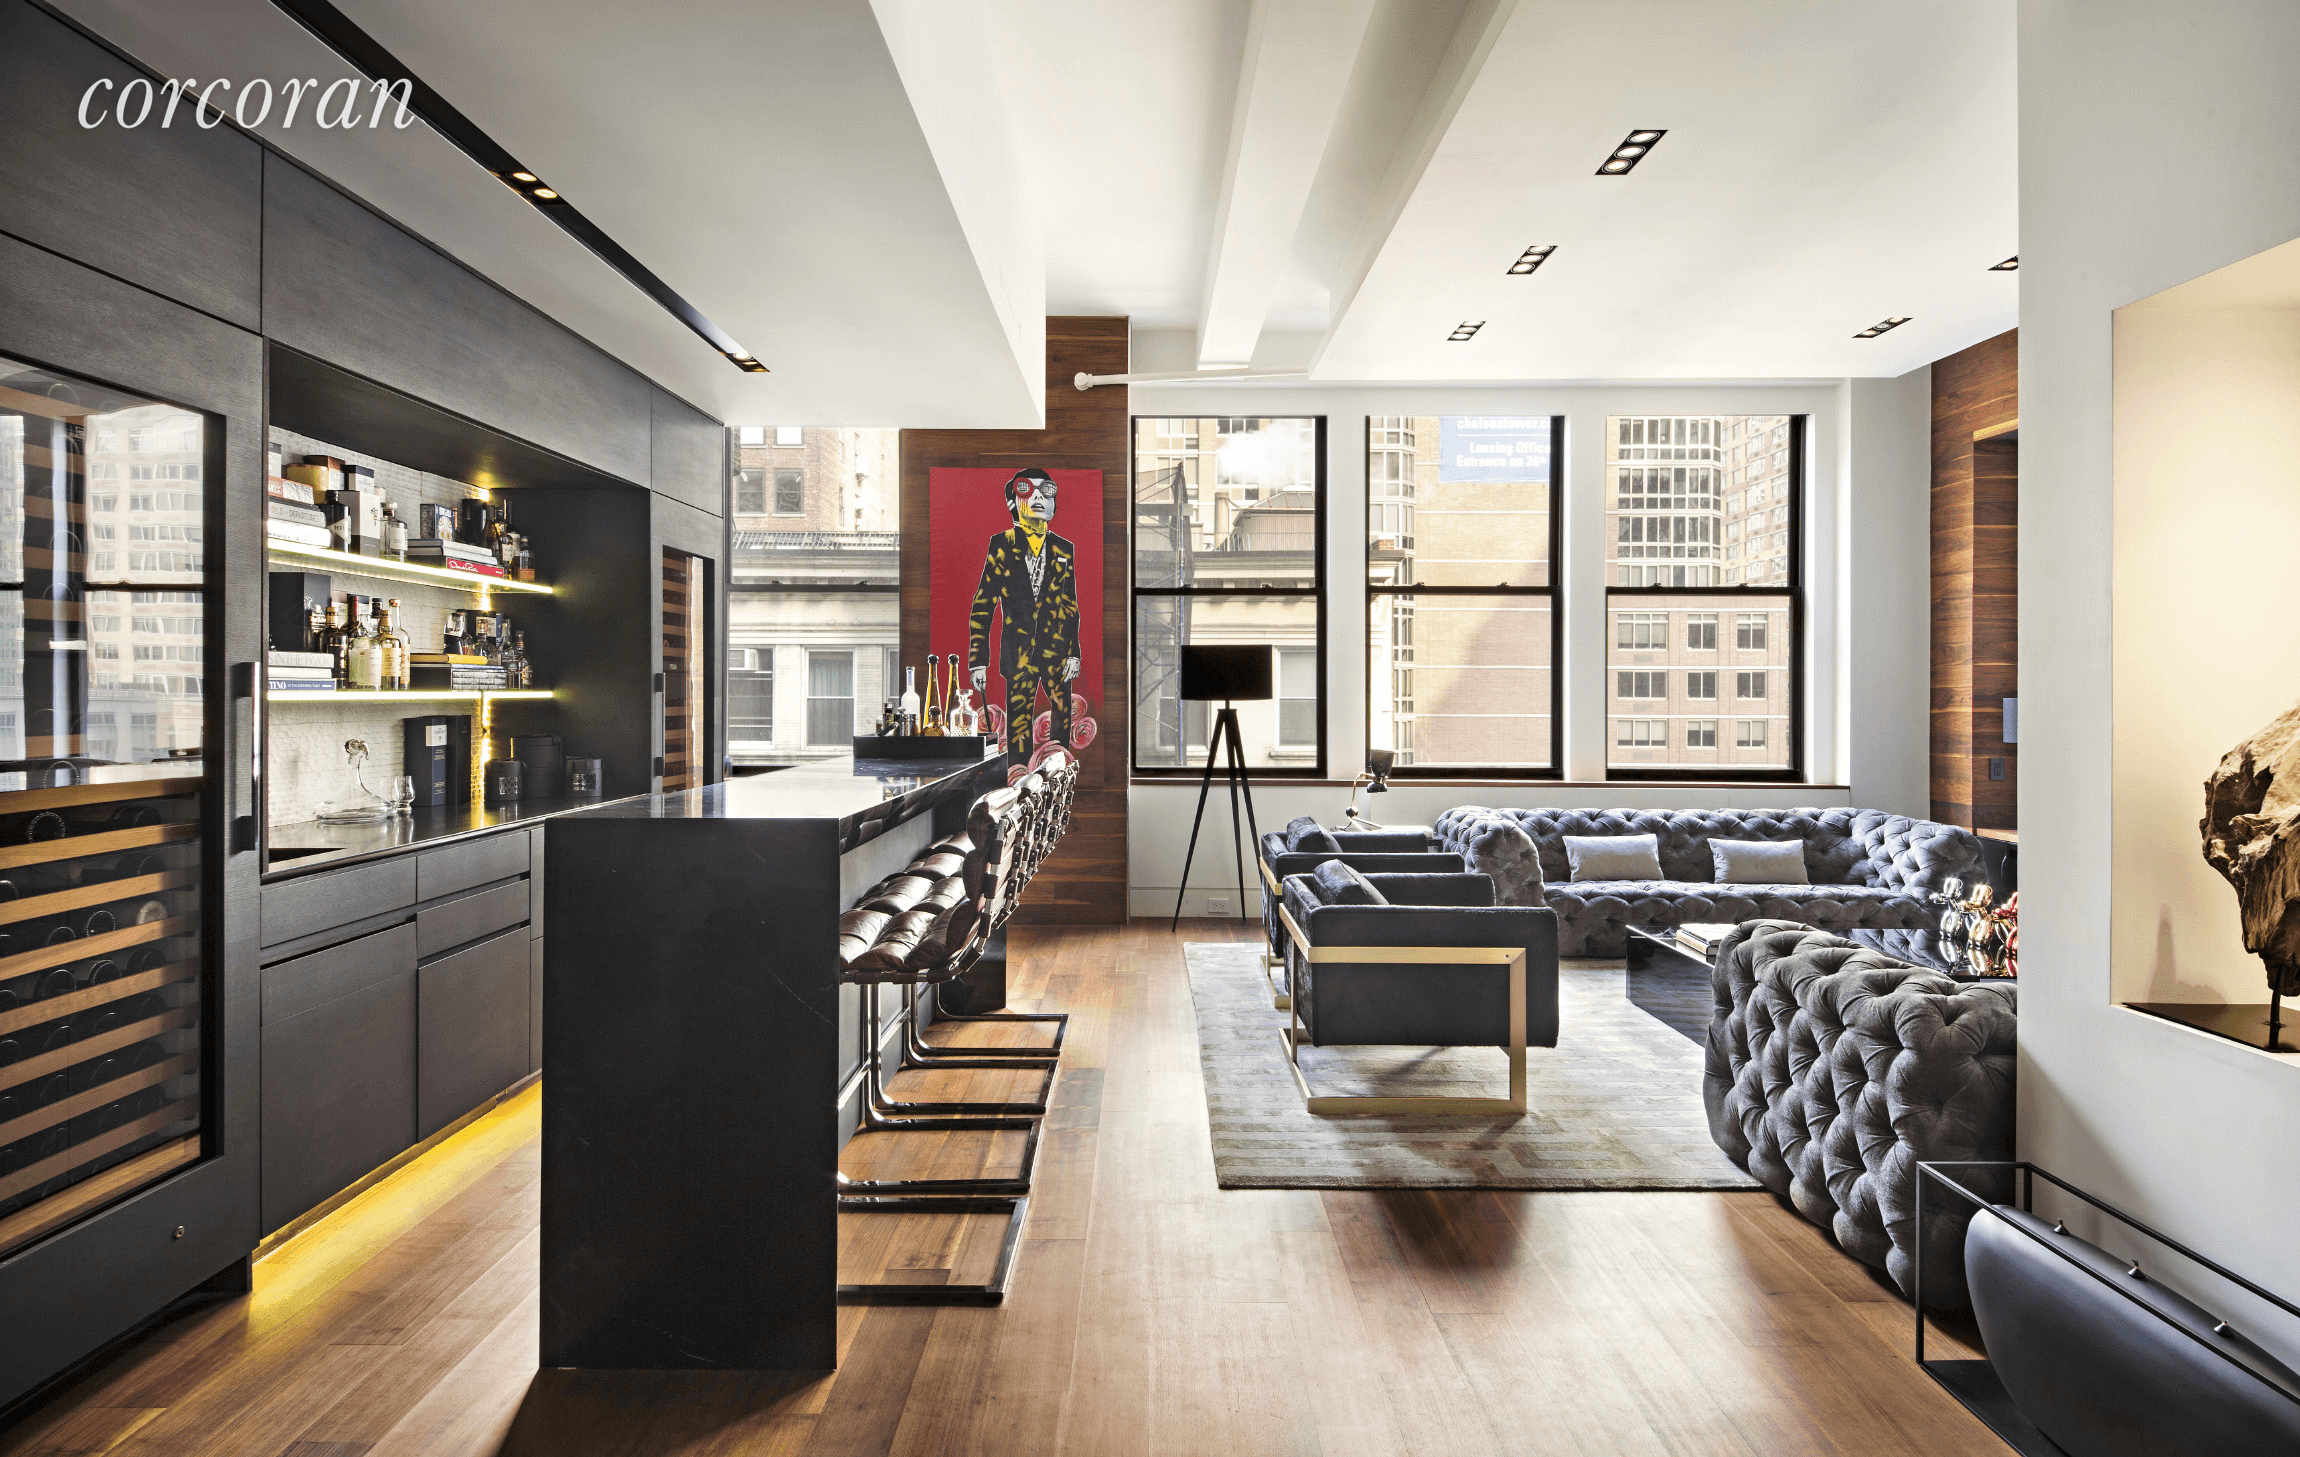 This expansive full floor loft has completed a full scale masterful renovation in early 2018 offering upscale luxury finishes in a historic, boutique condominium in Chelsea.